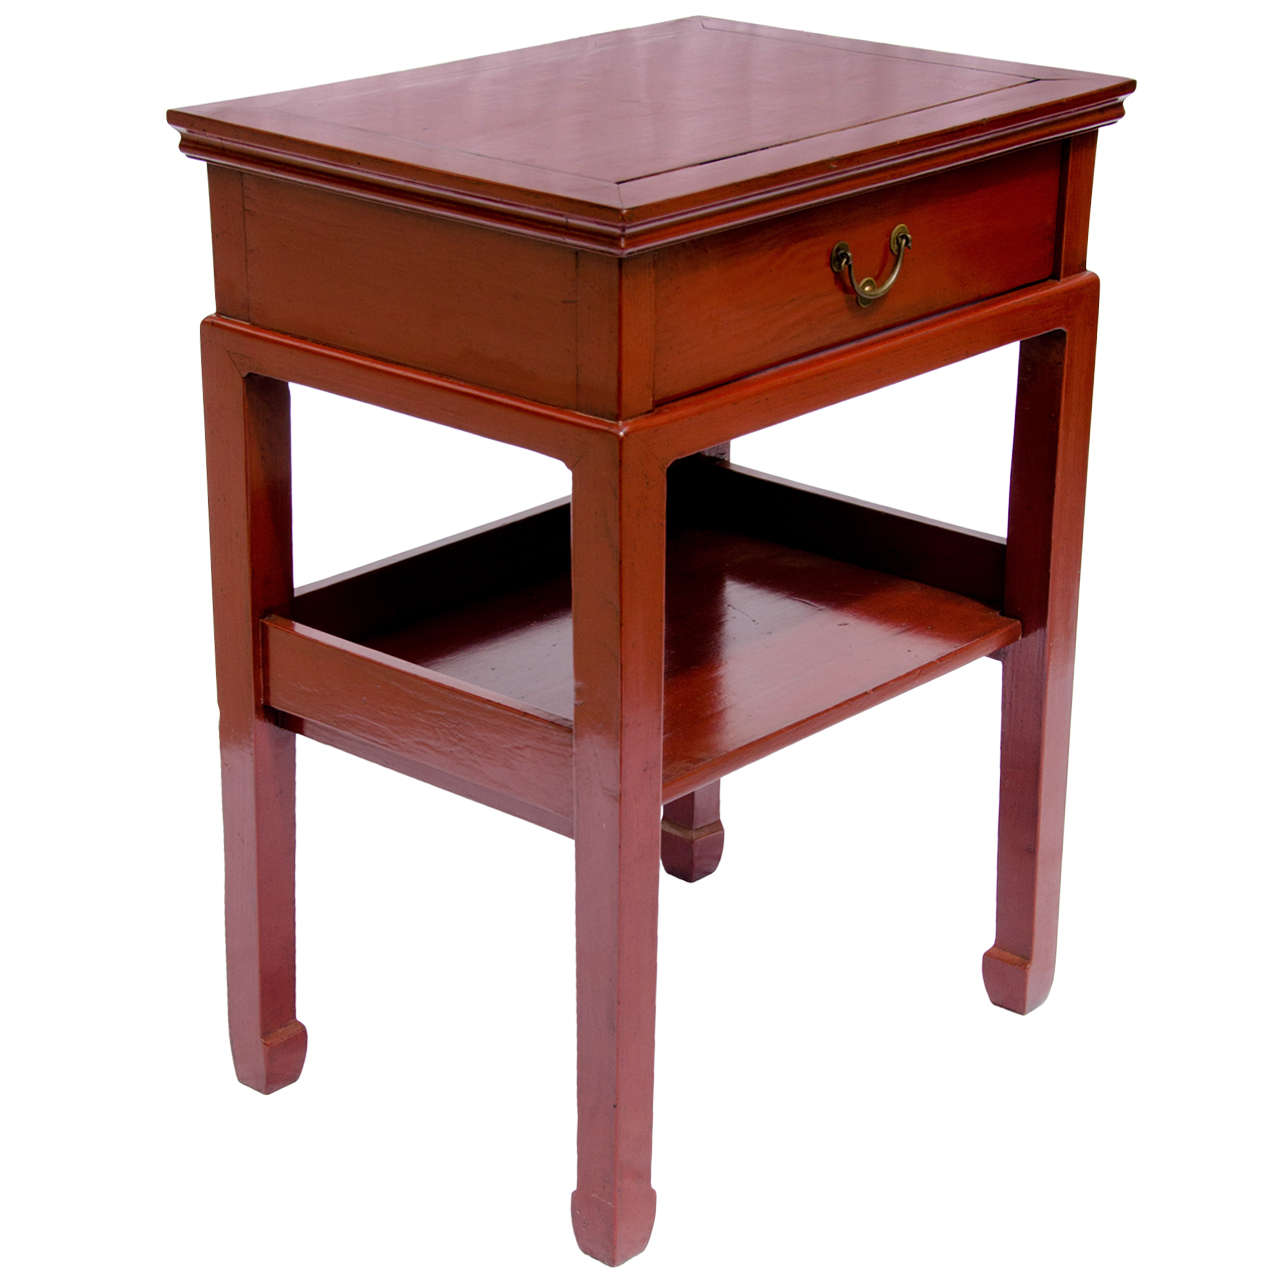 Turn of the Century Q'ing Dynasty Red Lacquered Side Table with Lower Shelf For Sale